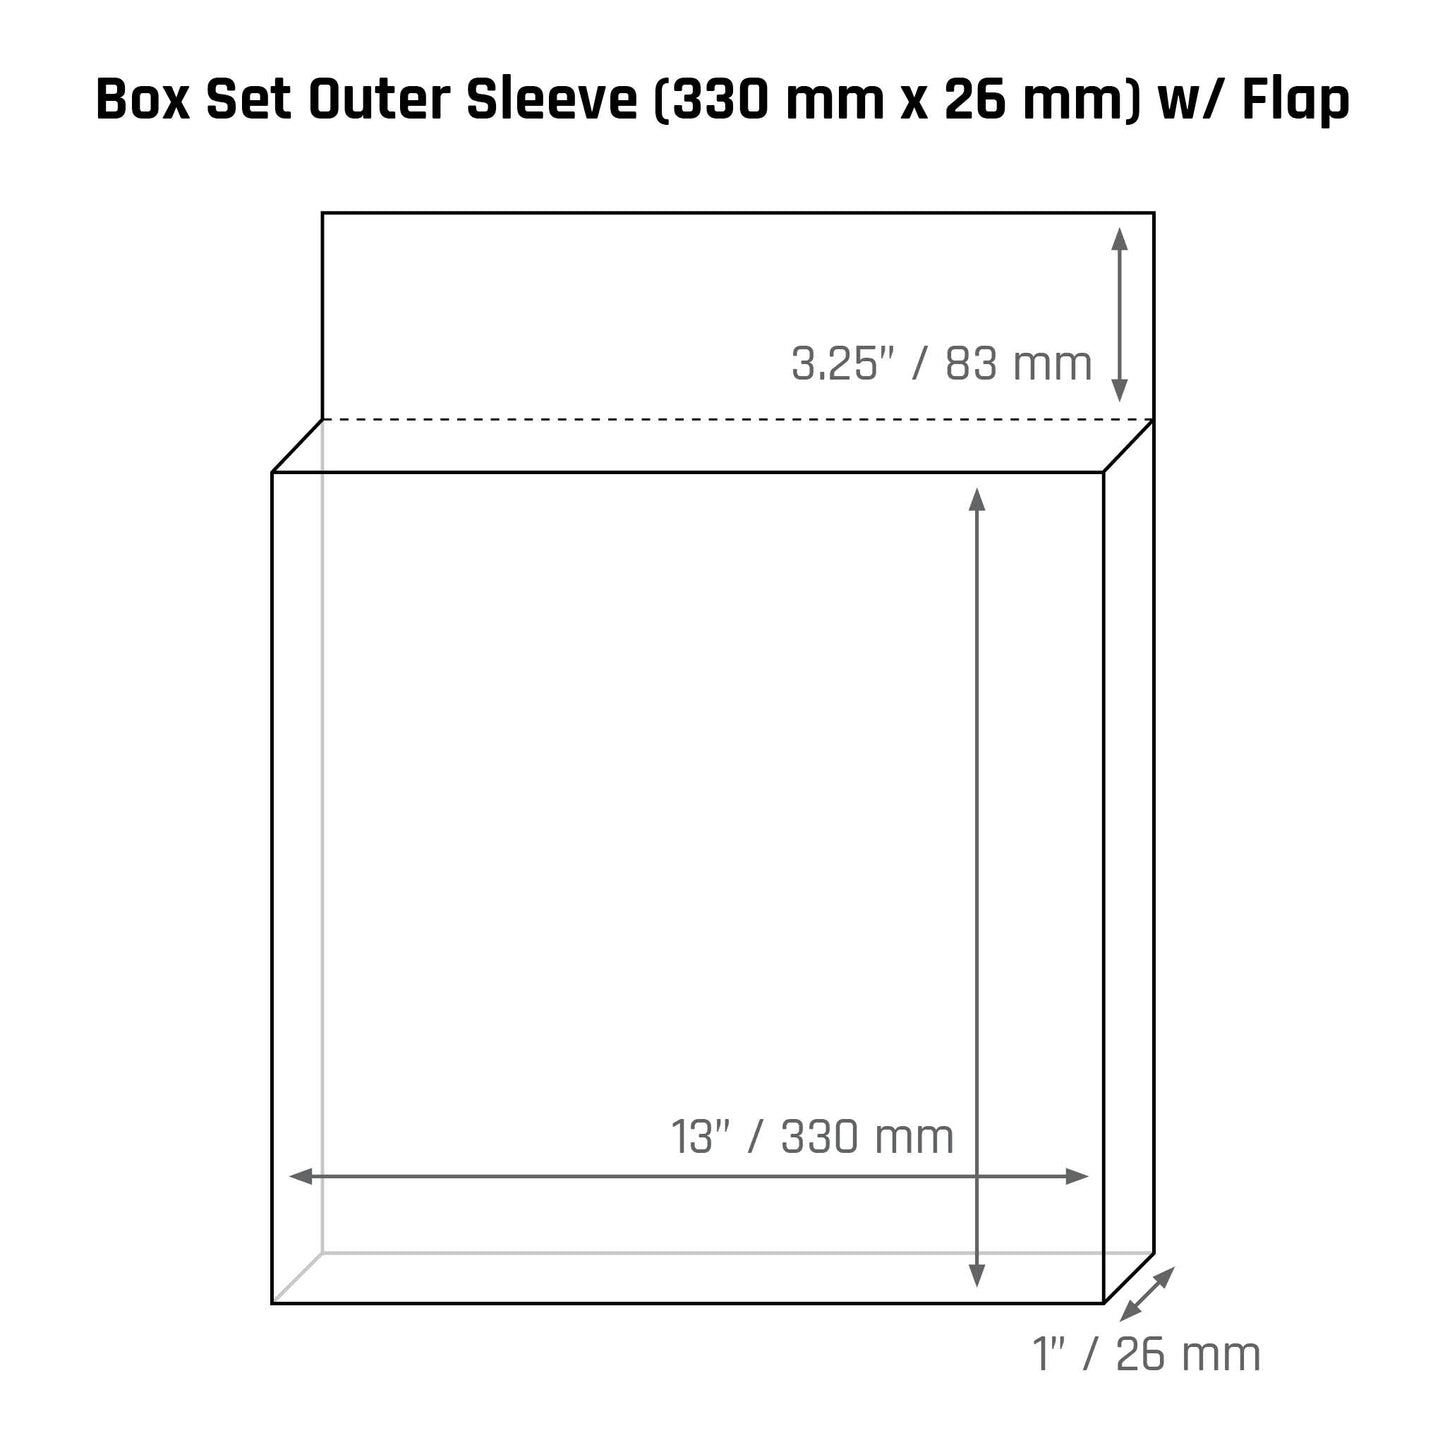 Box Set Outer Sleeve (330 mm x 26 mm) - 3mil